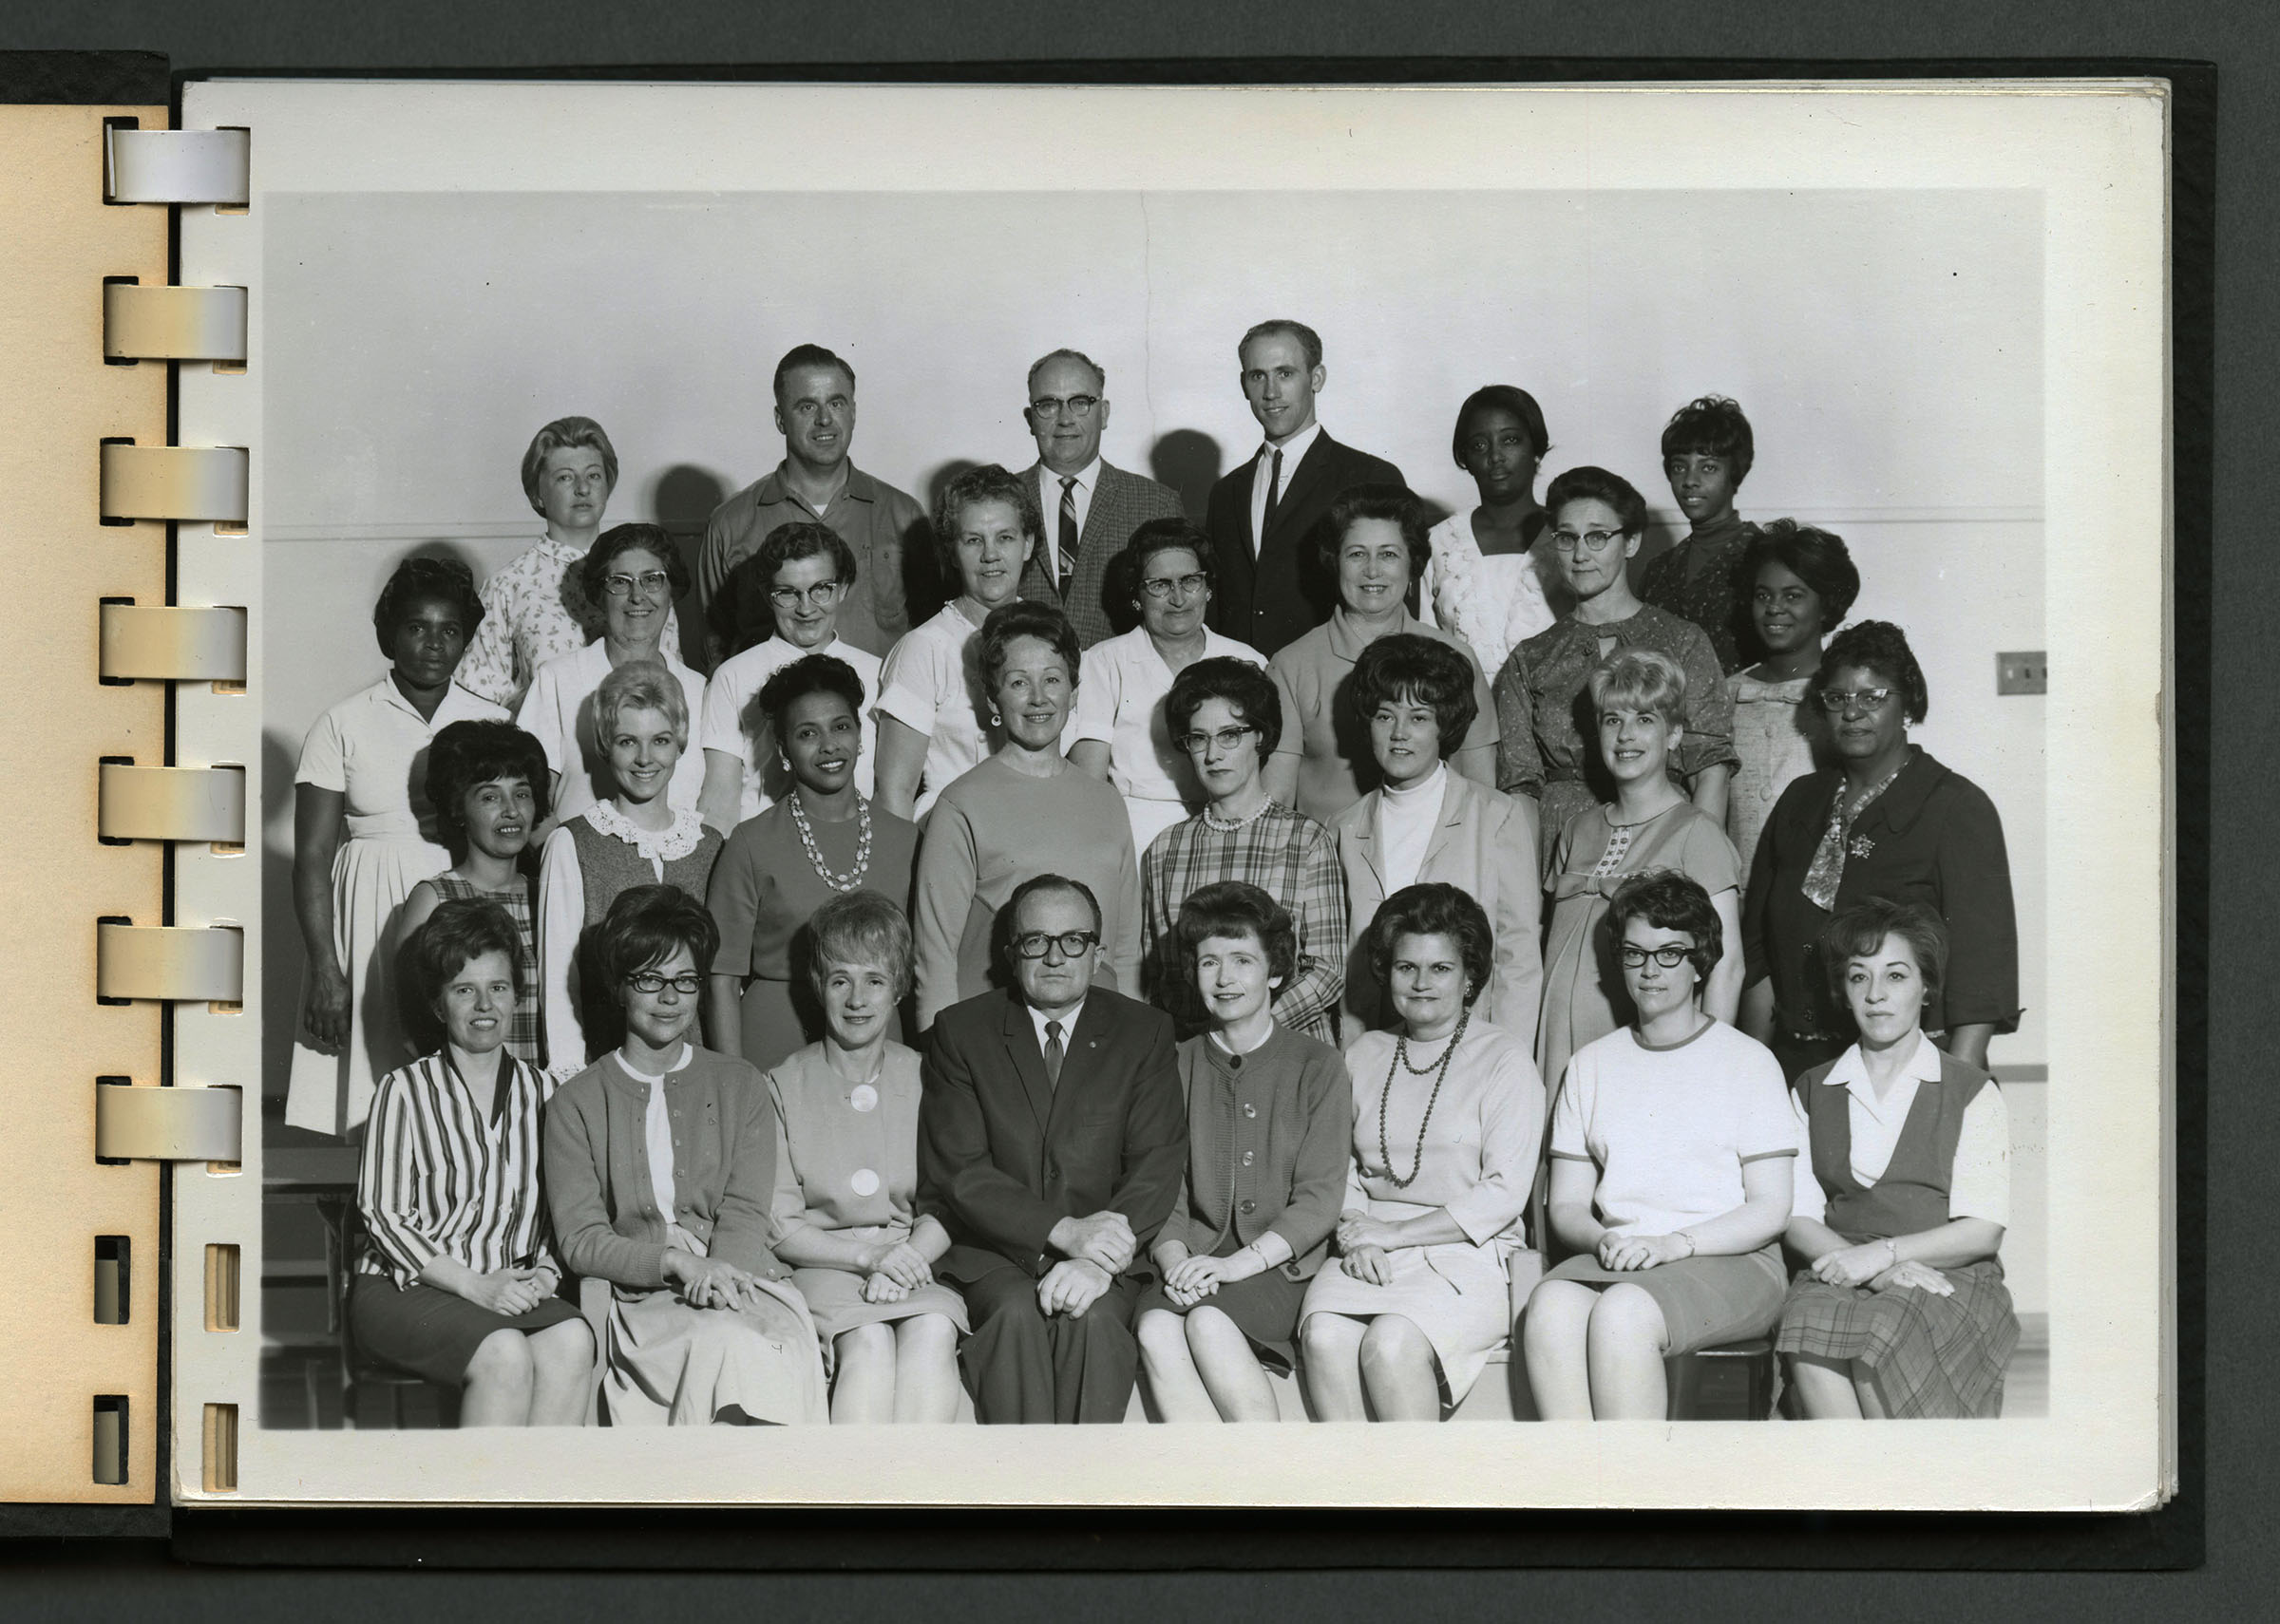 To show the school faculty and staff for the 1966-67 school year.